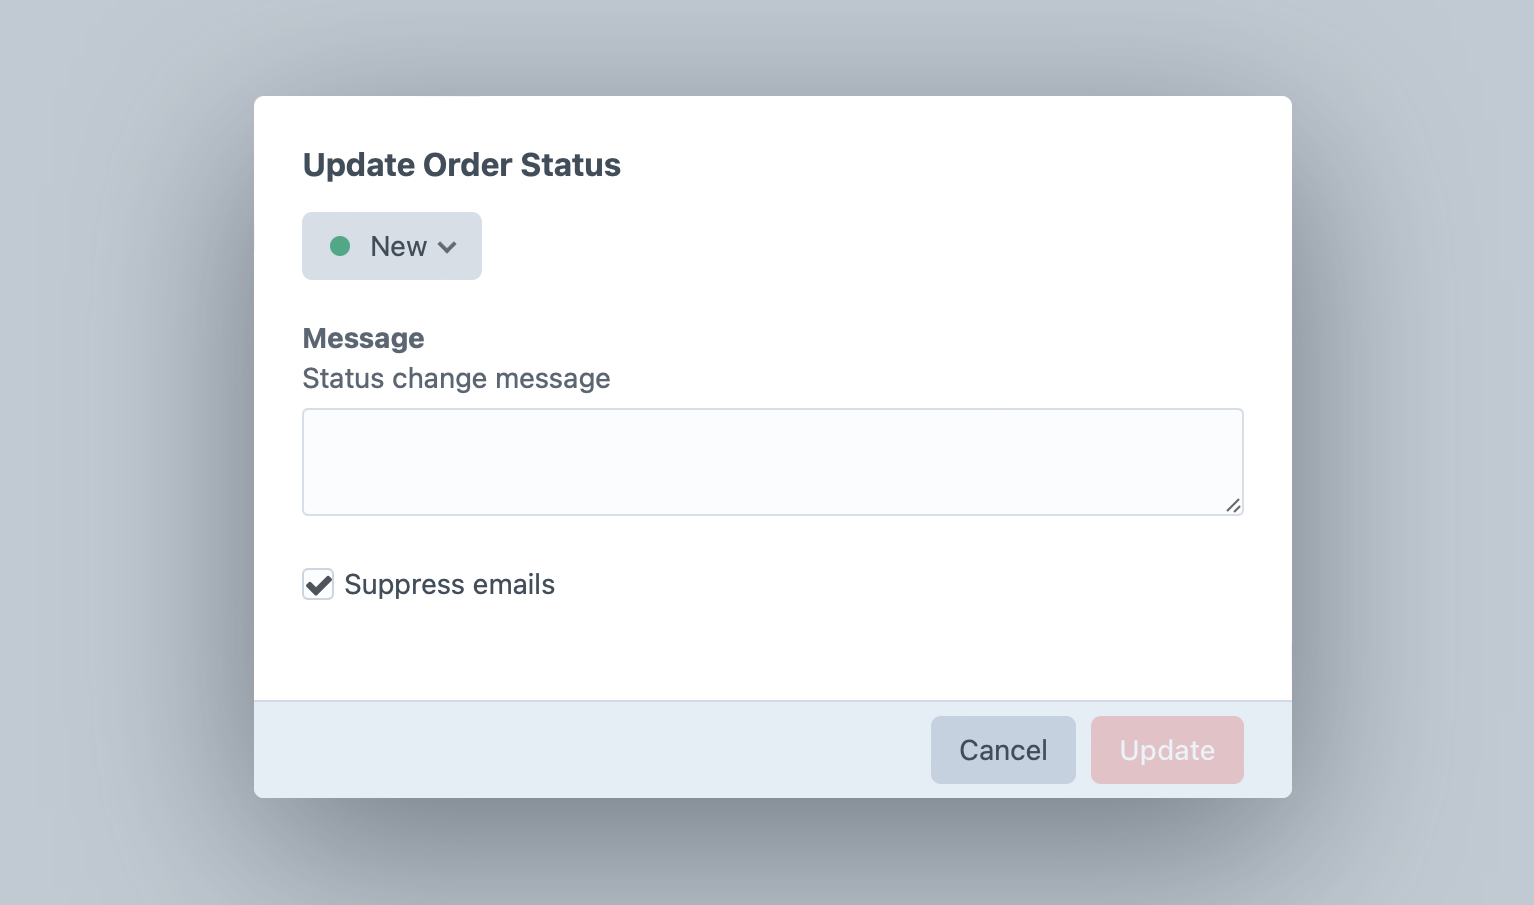 Screenshot of order status edit modal with “Update Order Status” heading, a status dropdown, message field, and “Suppress emails” checkbox